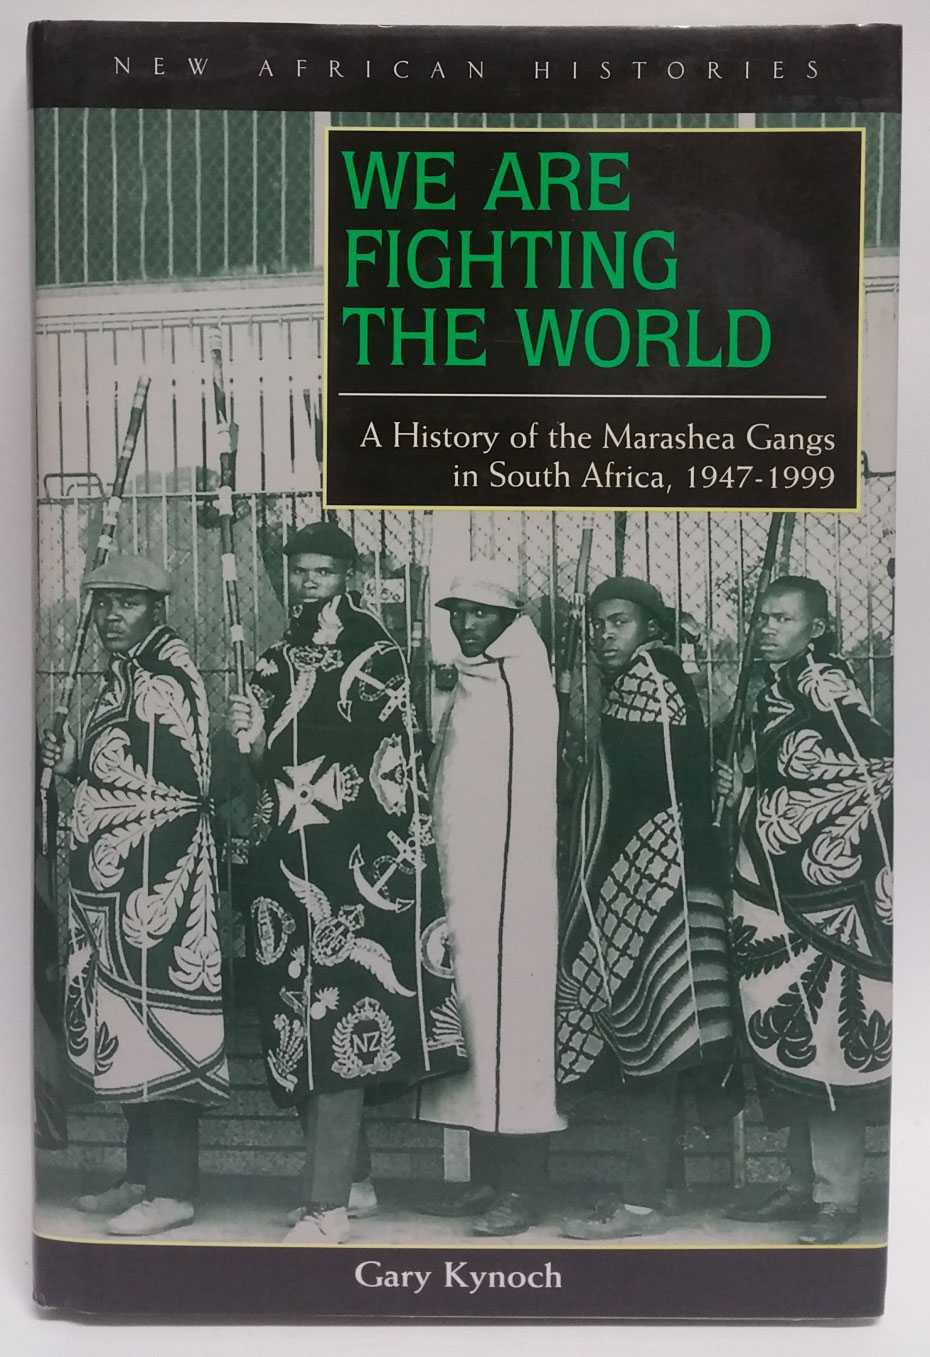 Gary Kynoch - We Are Fighting the World: A History of the Marashea Gangs in South Africa, 1947-1999